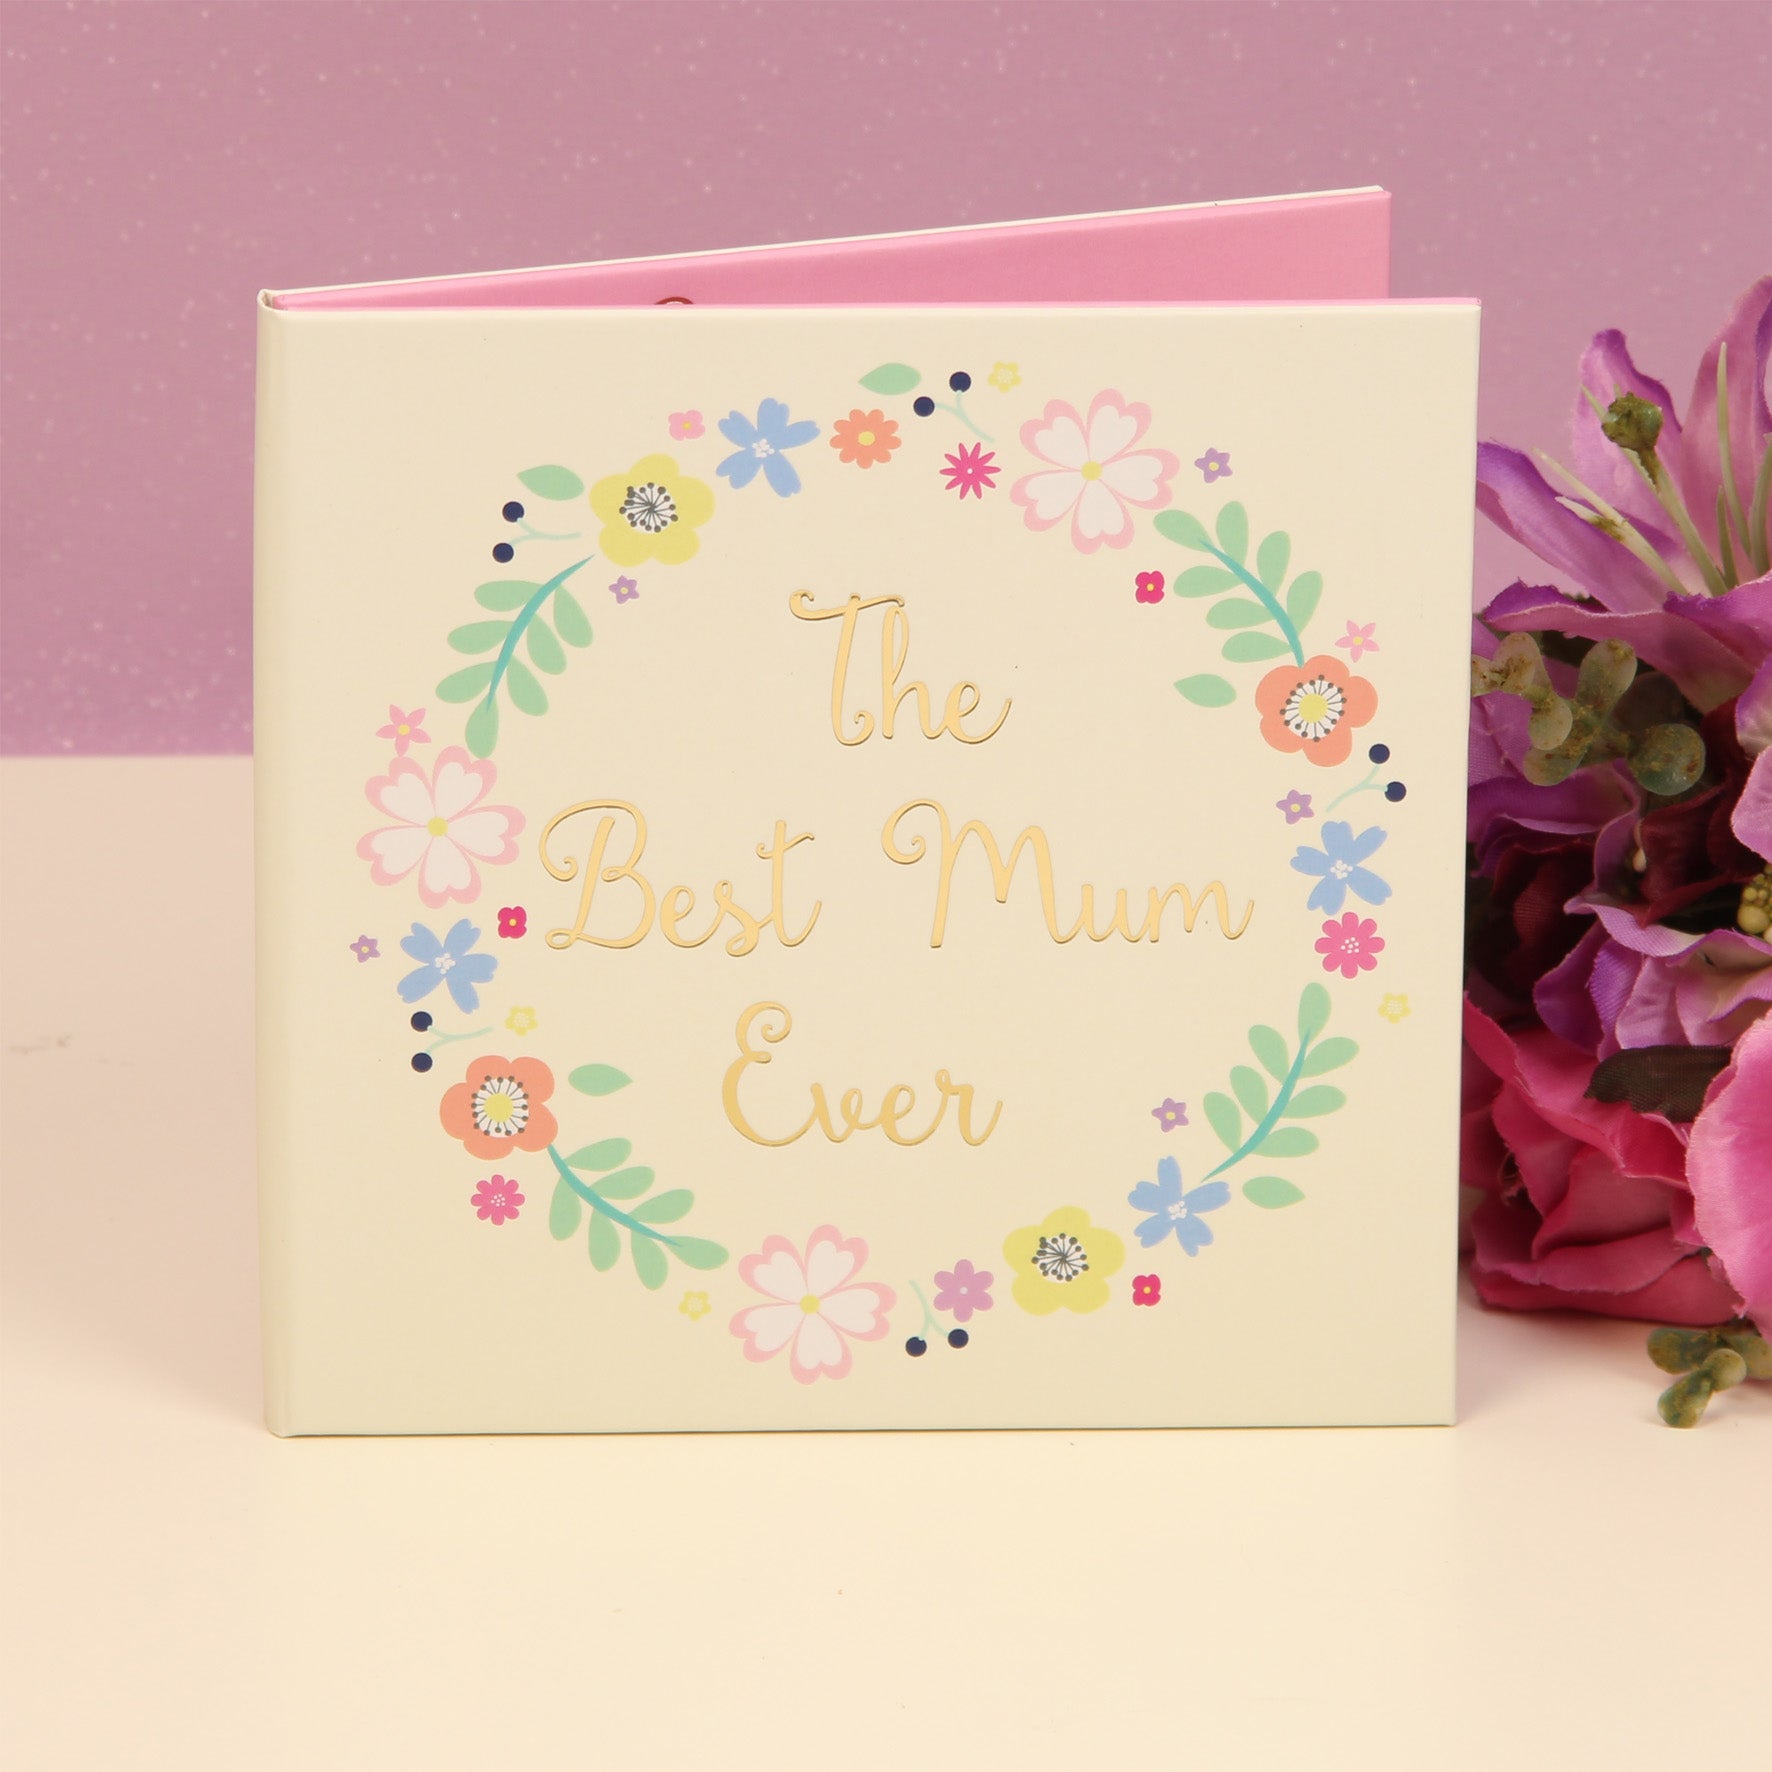 Ditsy Floral FL701 Paperwrap Double Frame - The Best Mum Ever - Premium Picture Frames from Widdop Bingham - Just $5.99! Shop now at W Hurst & Son (IW) Ltd